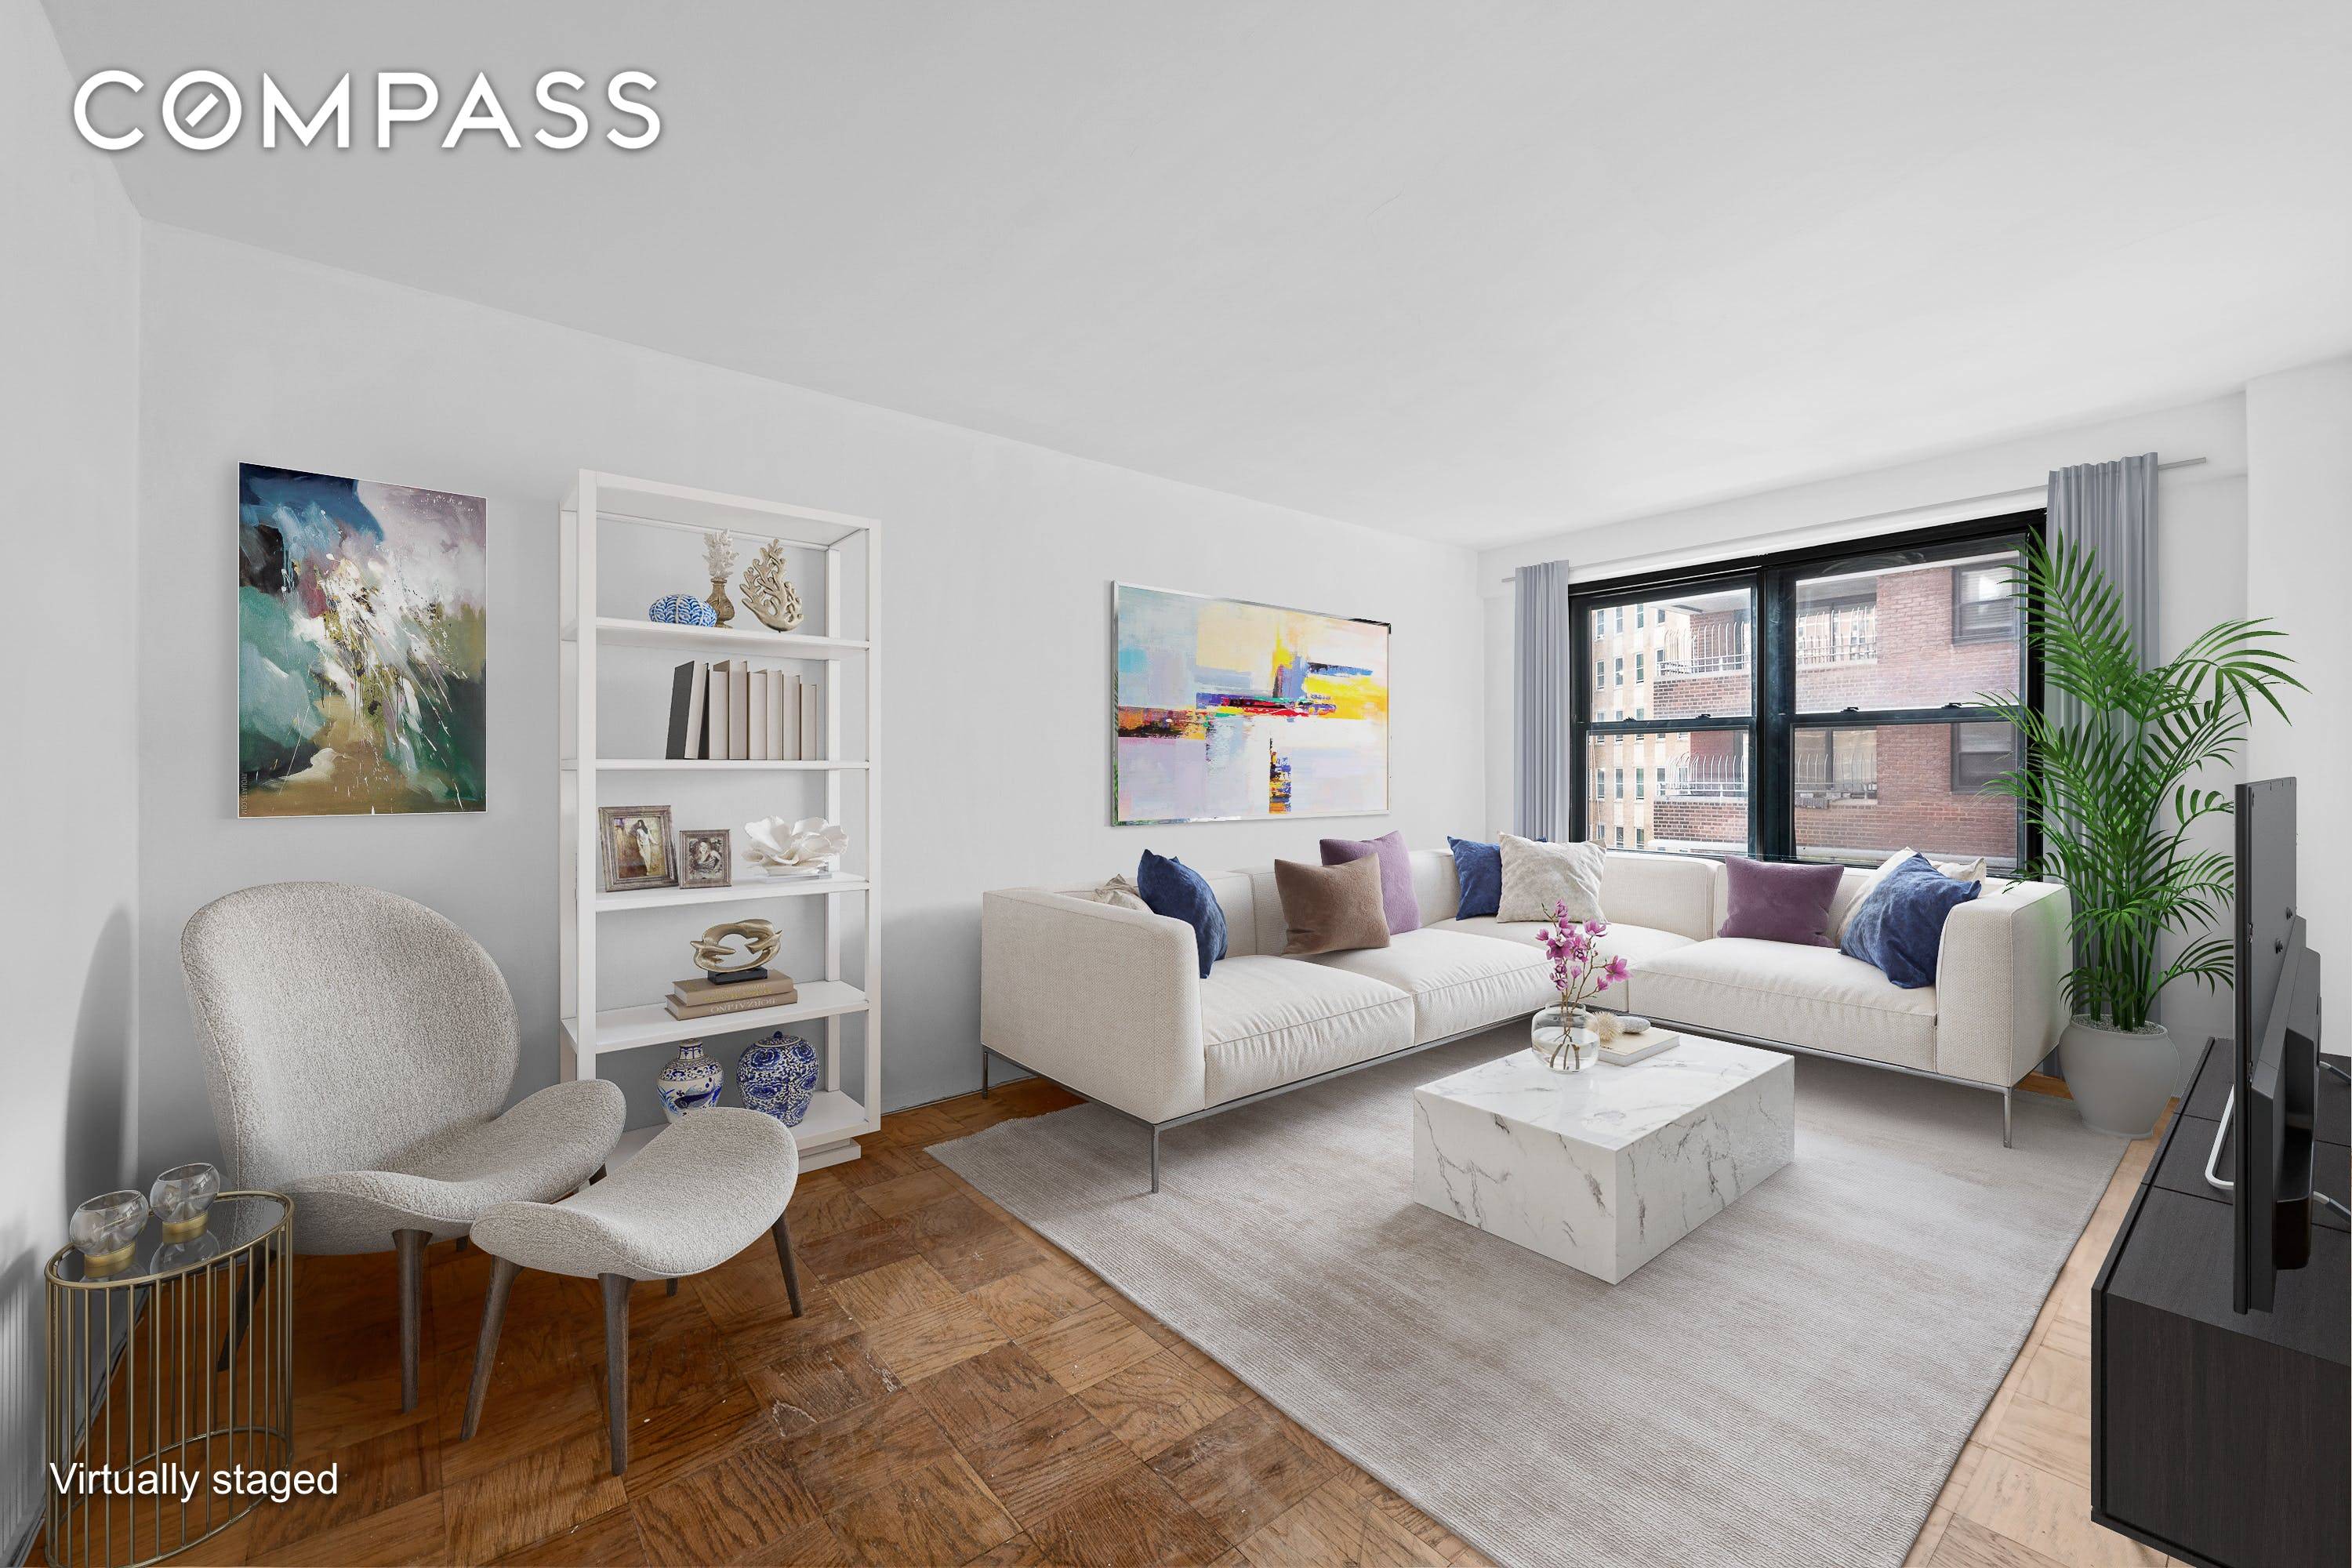 Here is your opportunity to create your dream home in the heart of the Lower East Side.